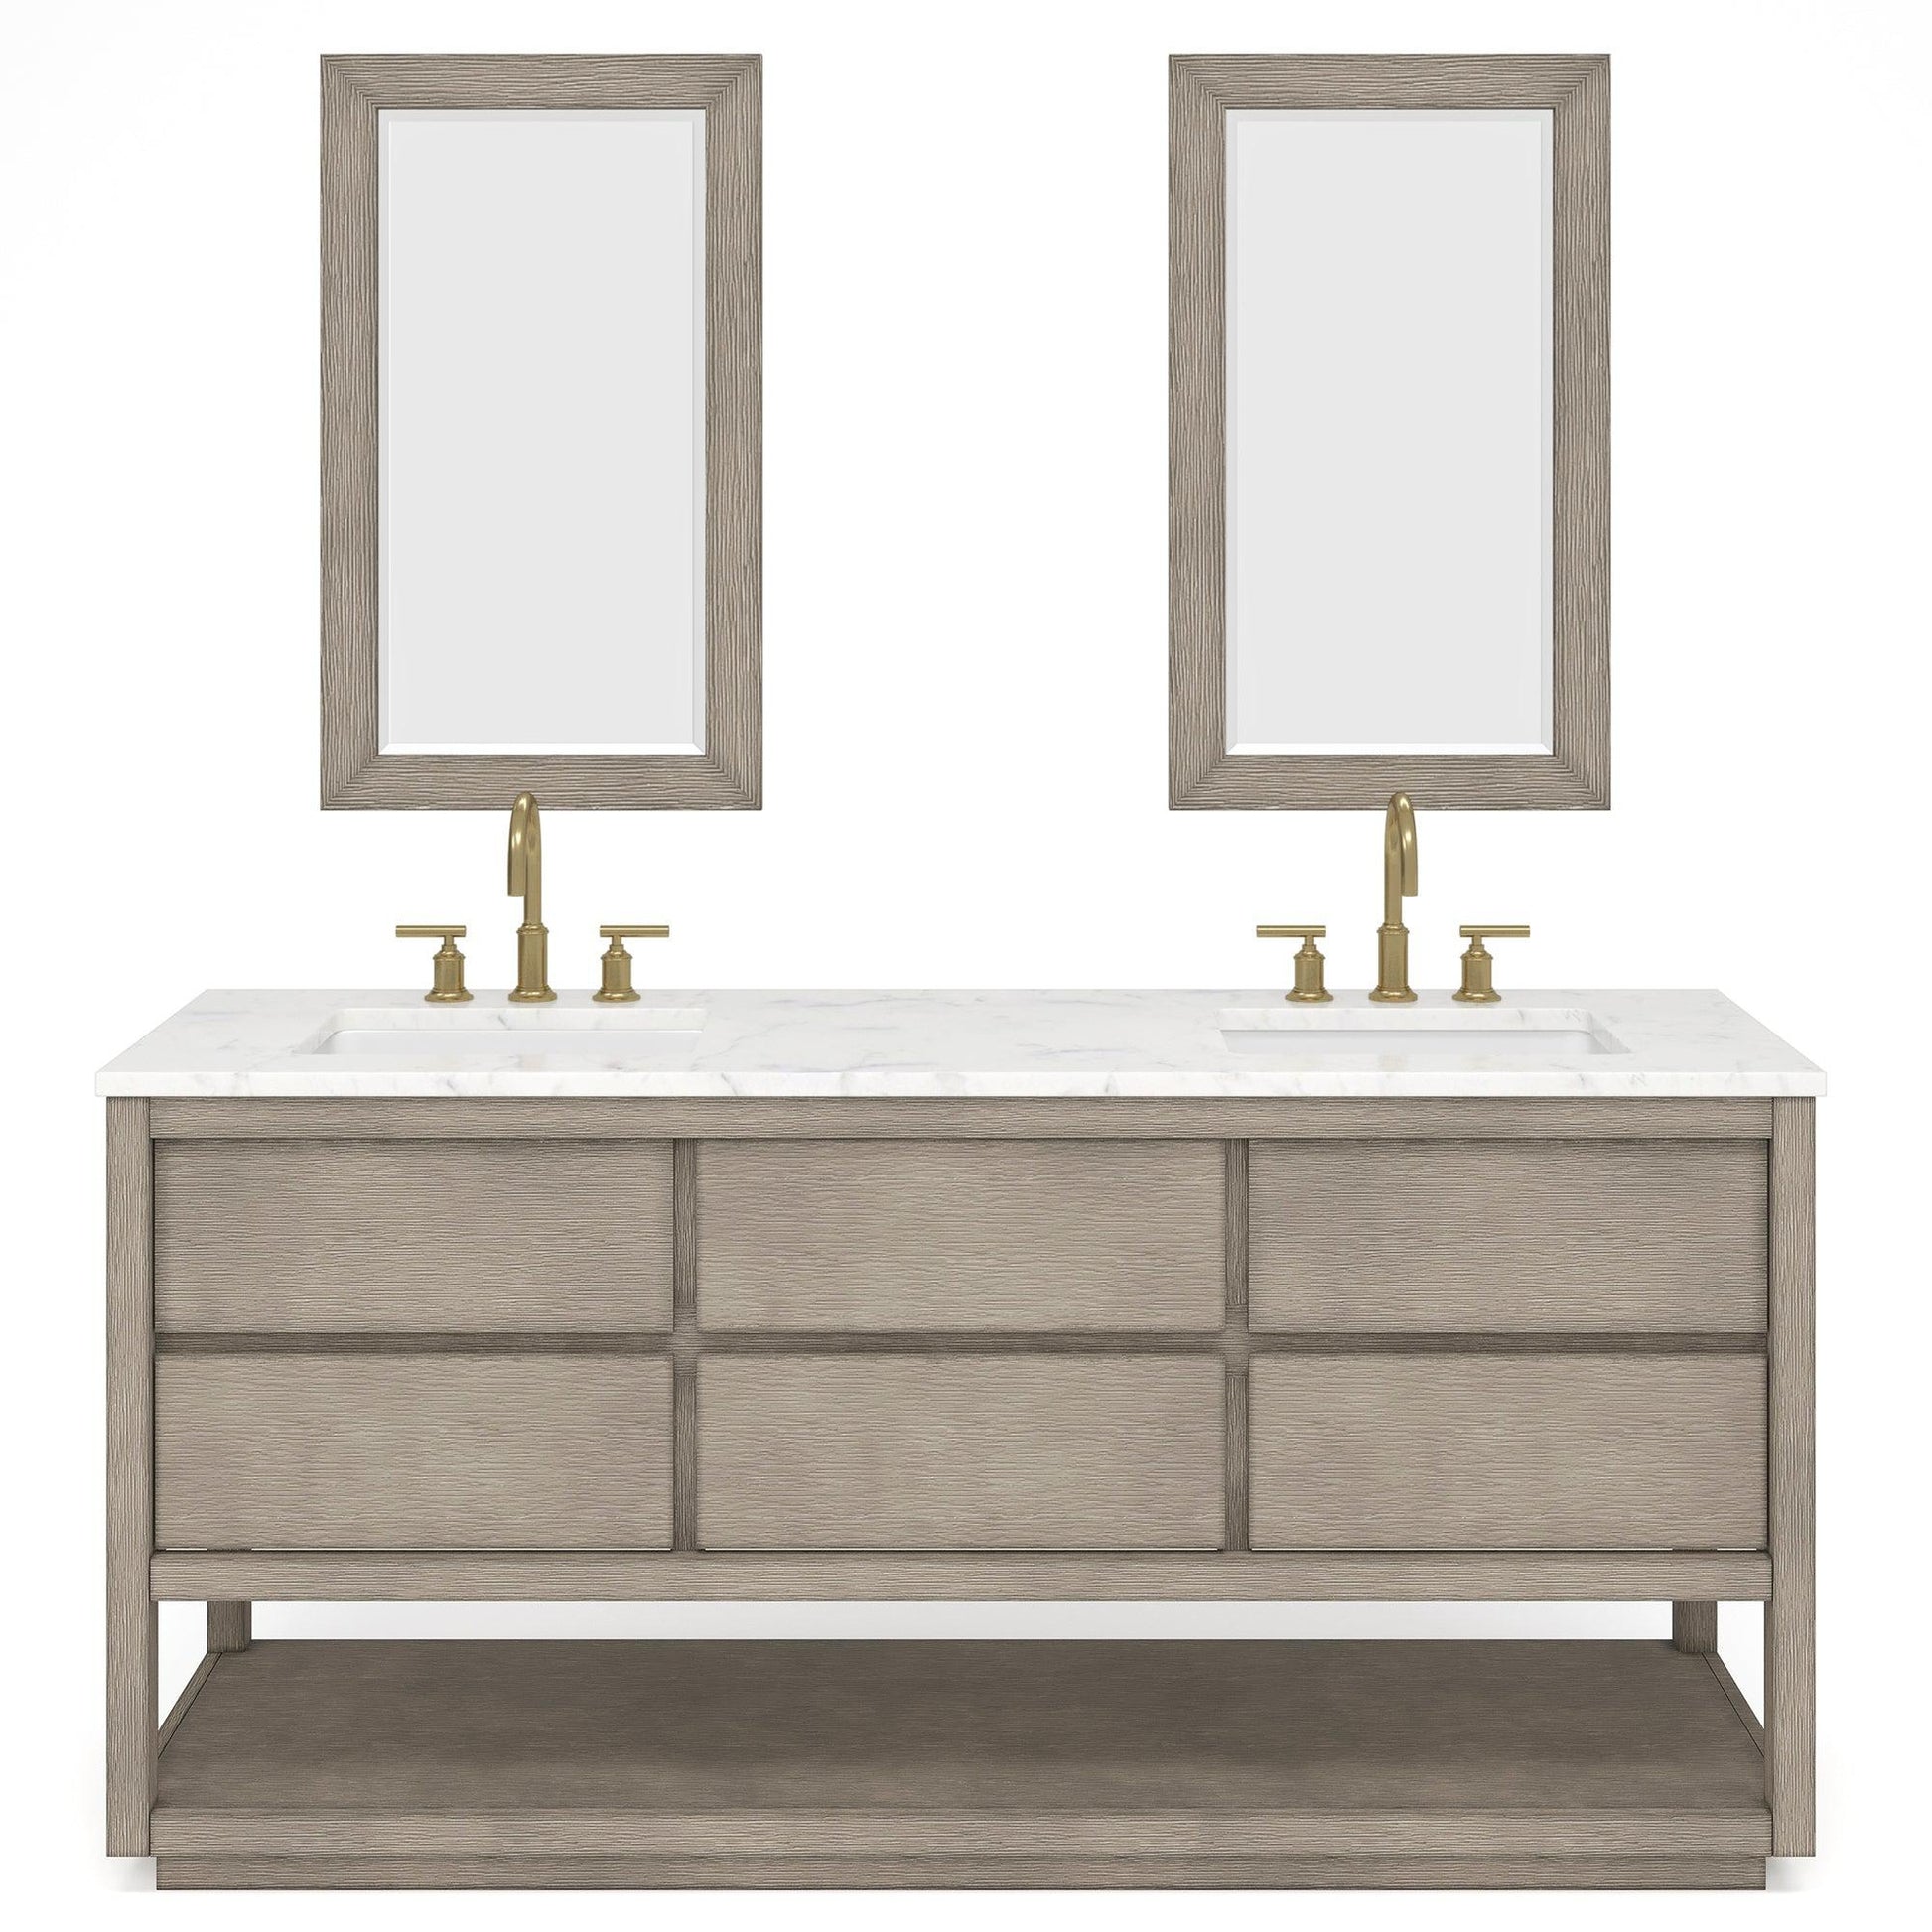 Water Creation Oakman 72" Double Sink Carrara White Marble Countertop Bath Vanity in Grey Oak with Gold Faucets and Rectangular Mirrors